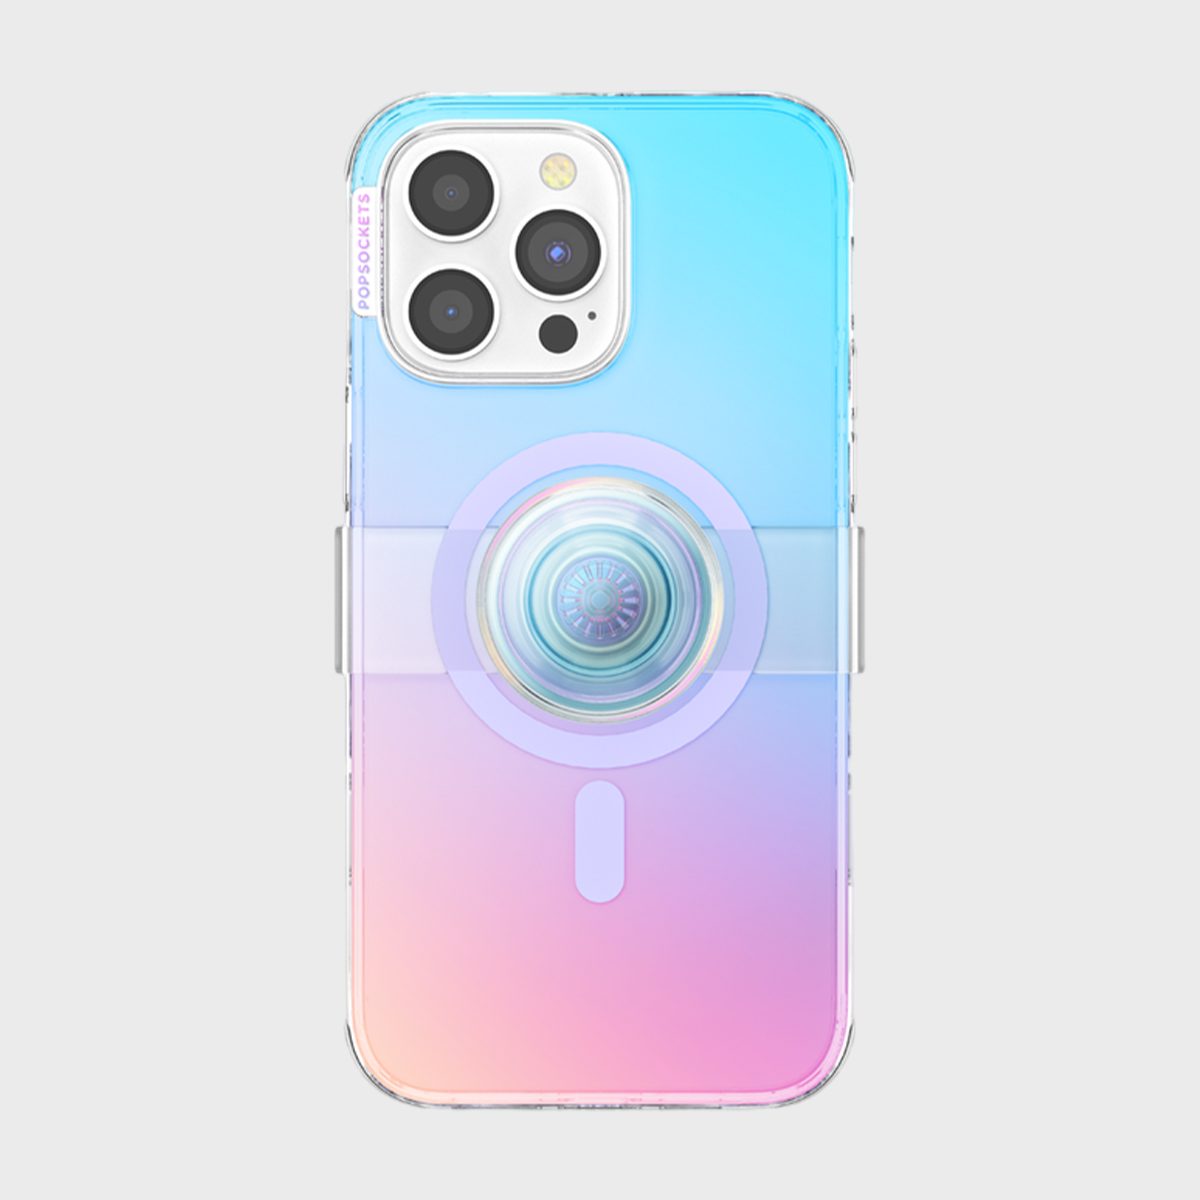 <p>People constantly remark about my steady video footage on a moving ship. Not to mention the epic shots I get of the ocean over the ship's railings without fear of dropping my phone. I owe it all to my trusty <a href="https://www.popsockets.com/en-us/p/white-iridescent-—-iphone-14-pro-max-for-magsafe/806453.html" rel="noopener">PopSockets phone case</a>.</p> <p>The durable design protects my phone in case of a fumble thanks to the drop protection of 10 feet. The ergonomic grip also allows me to hold onto my device securely with just one hand. It also helps make <a href="https://www.rd.com/list/how-to-take-a-selfie/">taking selfies</a> easier because you have something comfortable to hold onto, which is a must on any cruise.</p> <p class="listicle-page__cta-button-shop"><a class="shop-btn" href="https://www.popsockets.com/en-us/p/white-iridescent-—-iphone-14-pro-max-for-magsafe/806453.html">Shop Now</a></p>